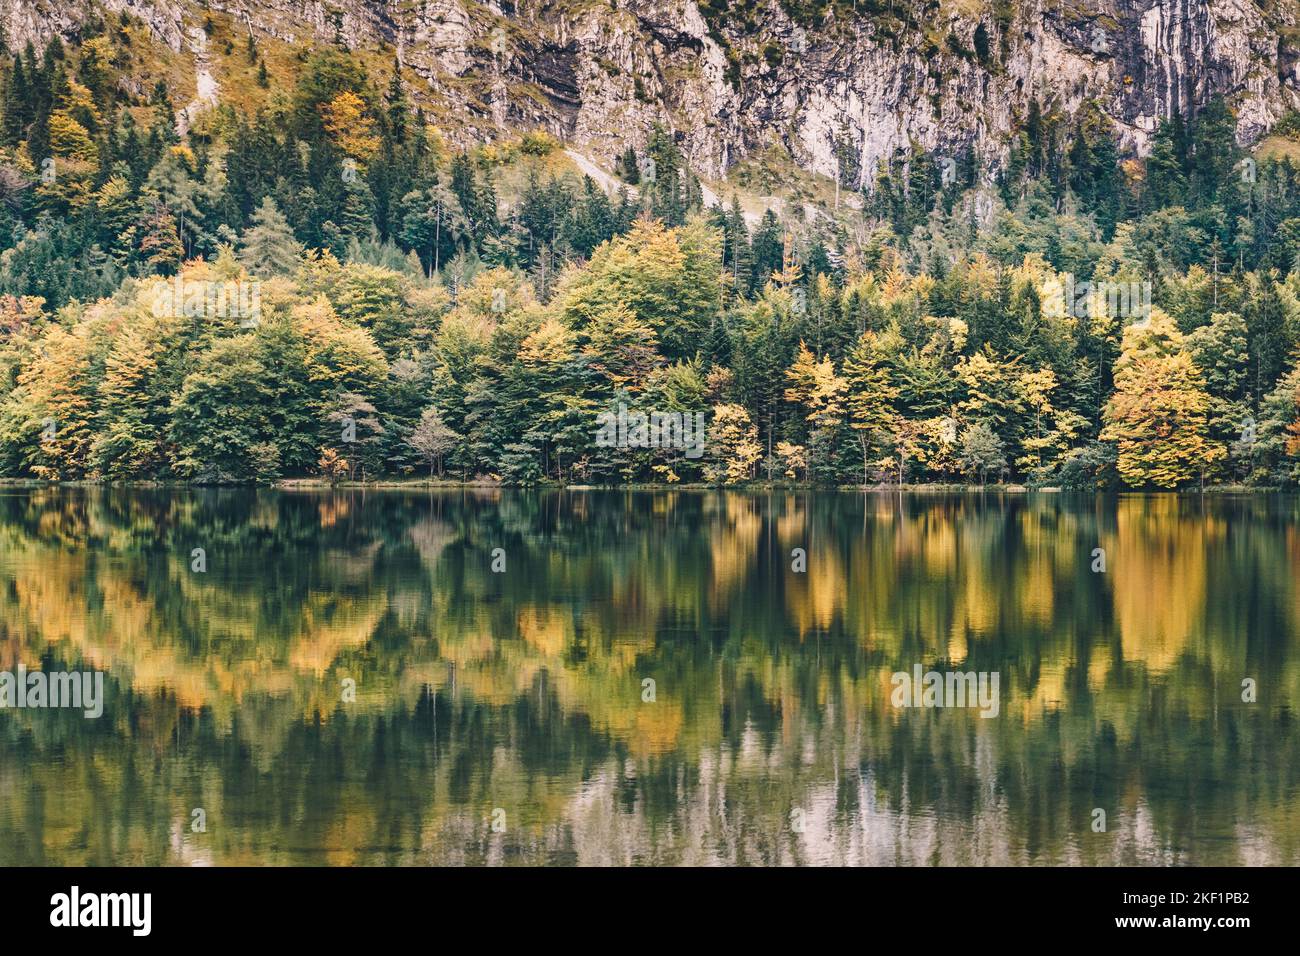 Lake Laudachsee in Upper Austria during autumn. Scenic landscape with forest trees reflection. Stock Photo